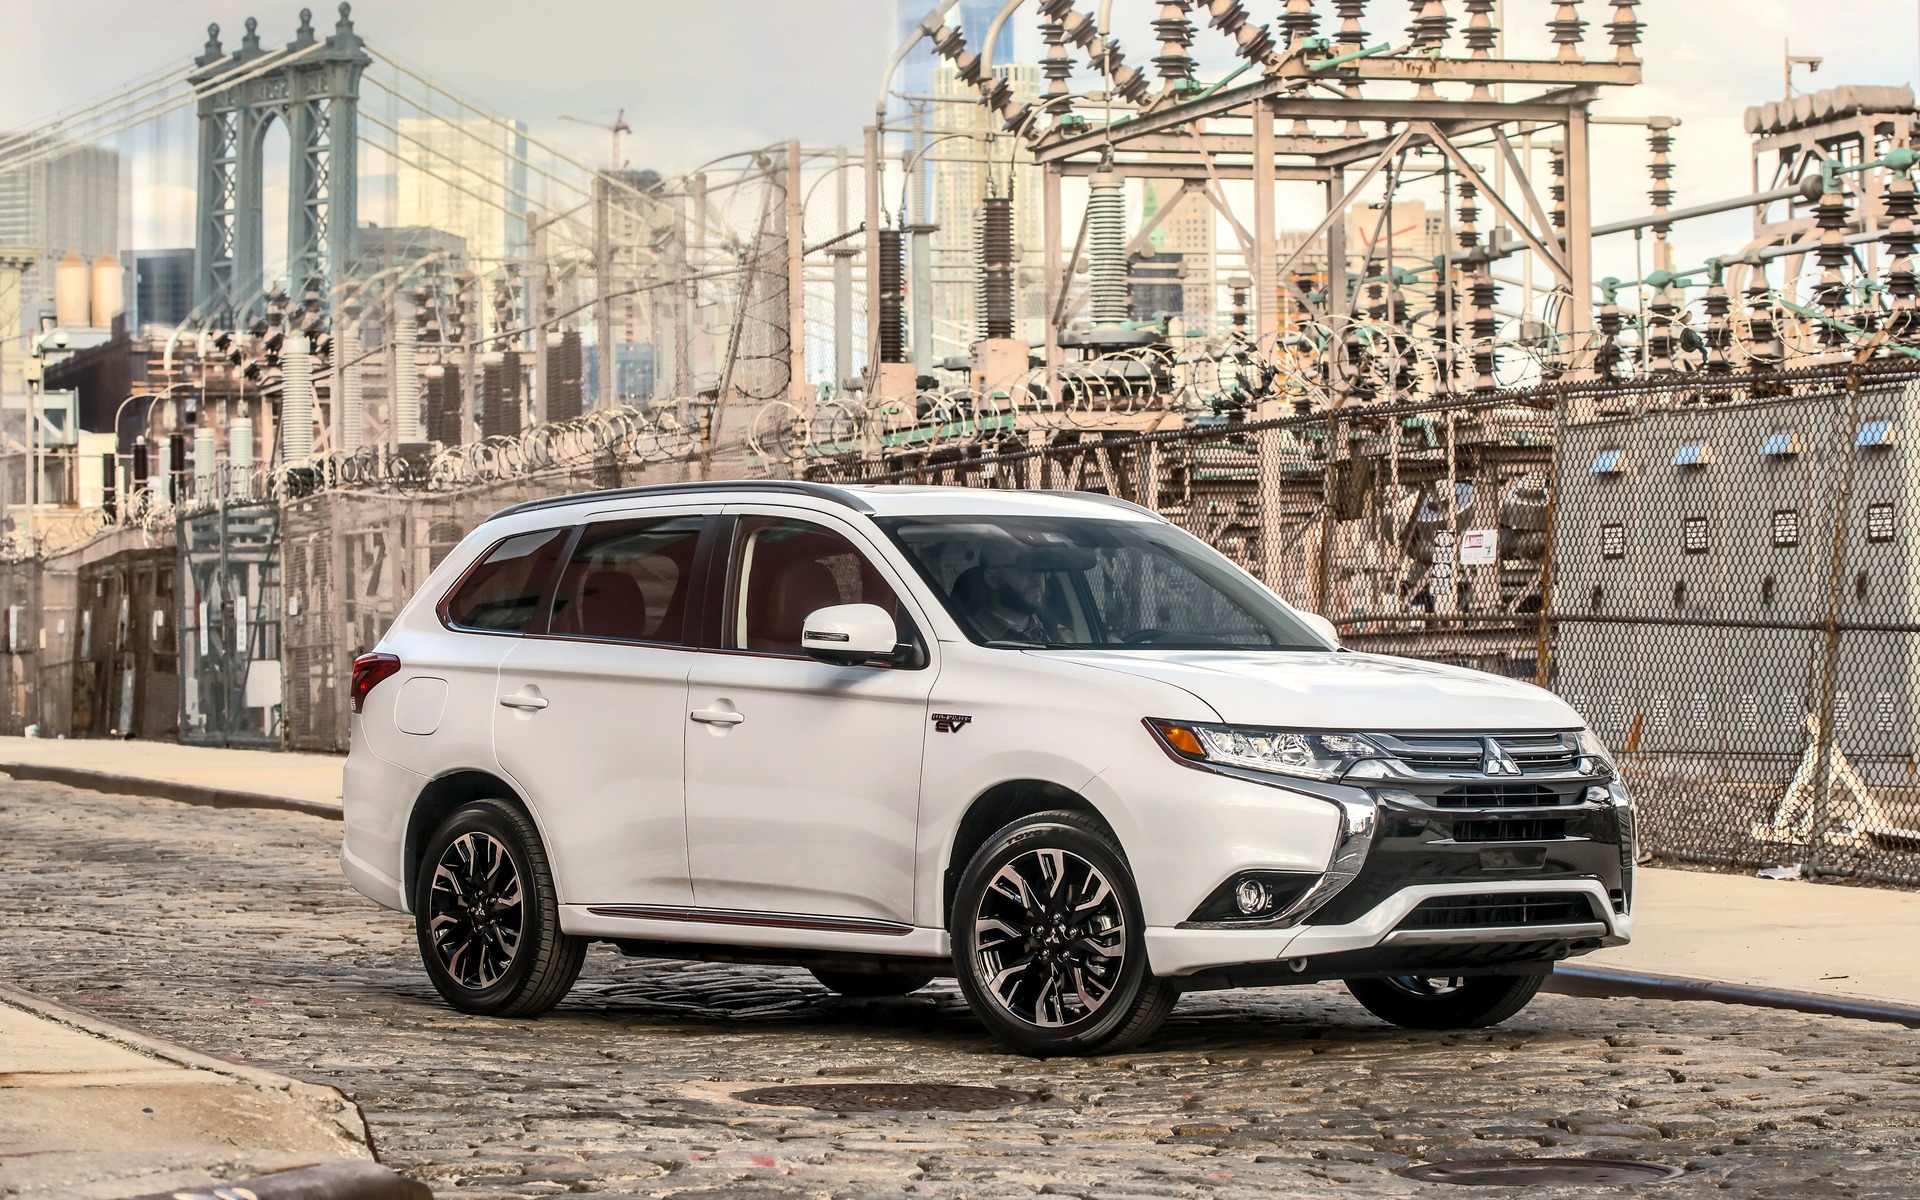 2017 Mitsubishi Outlander - News, reviews, picture galleries and videos -  The Car Guide